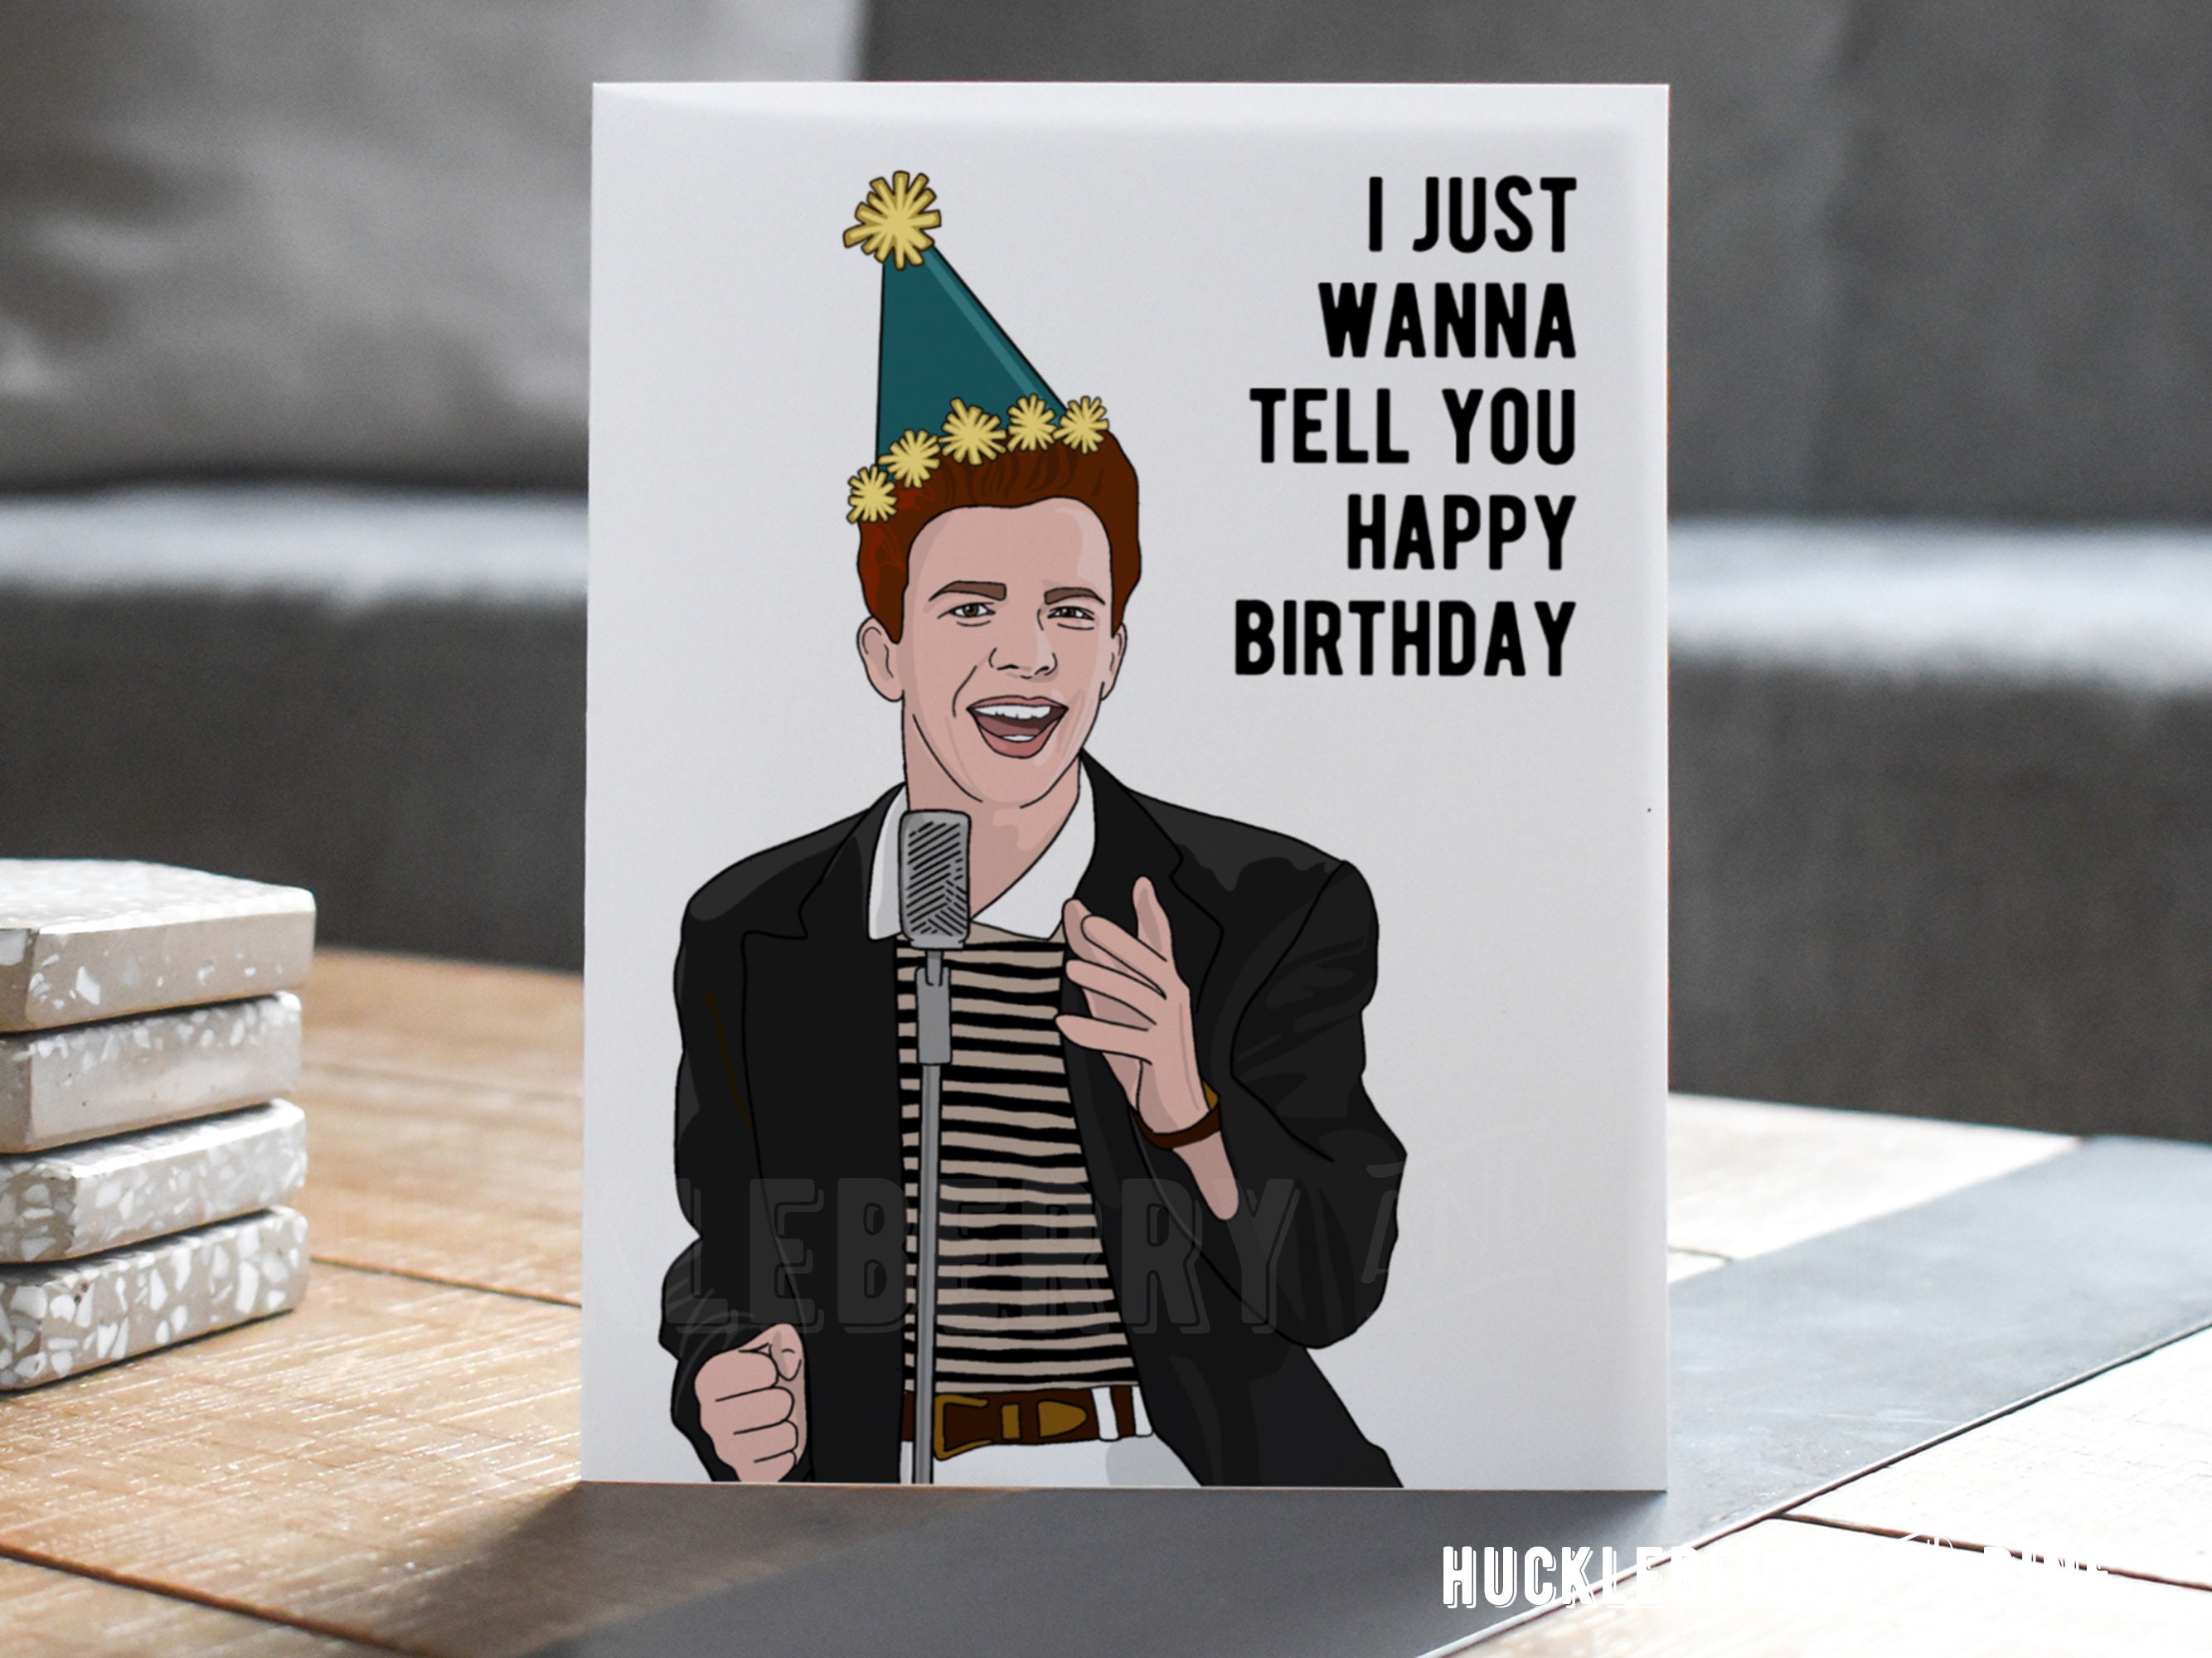 Rickroll Spotify code Greeting Card for Sale by anjalichurcher